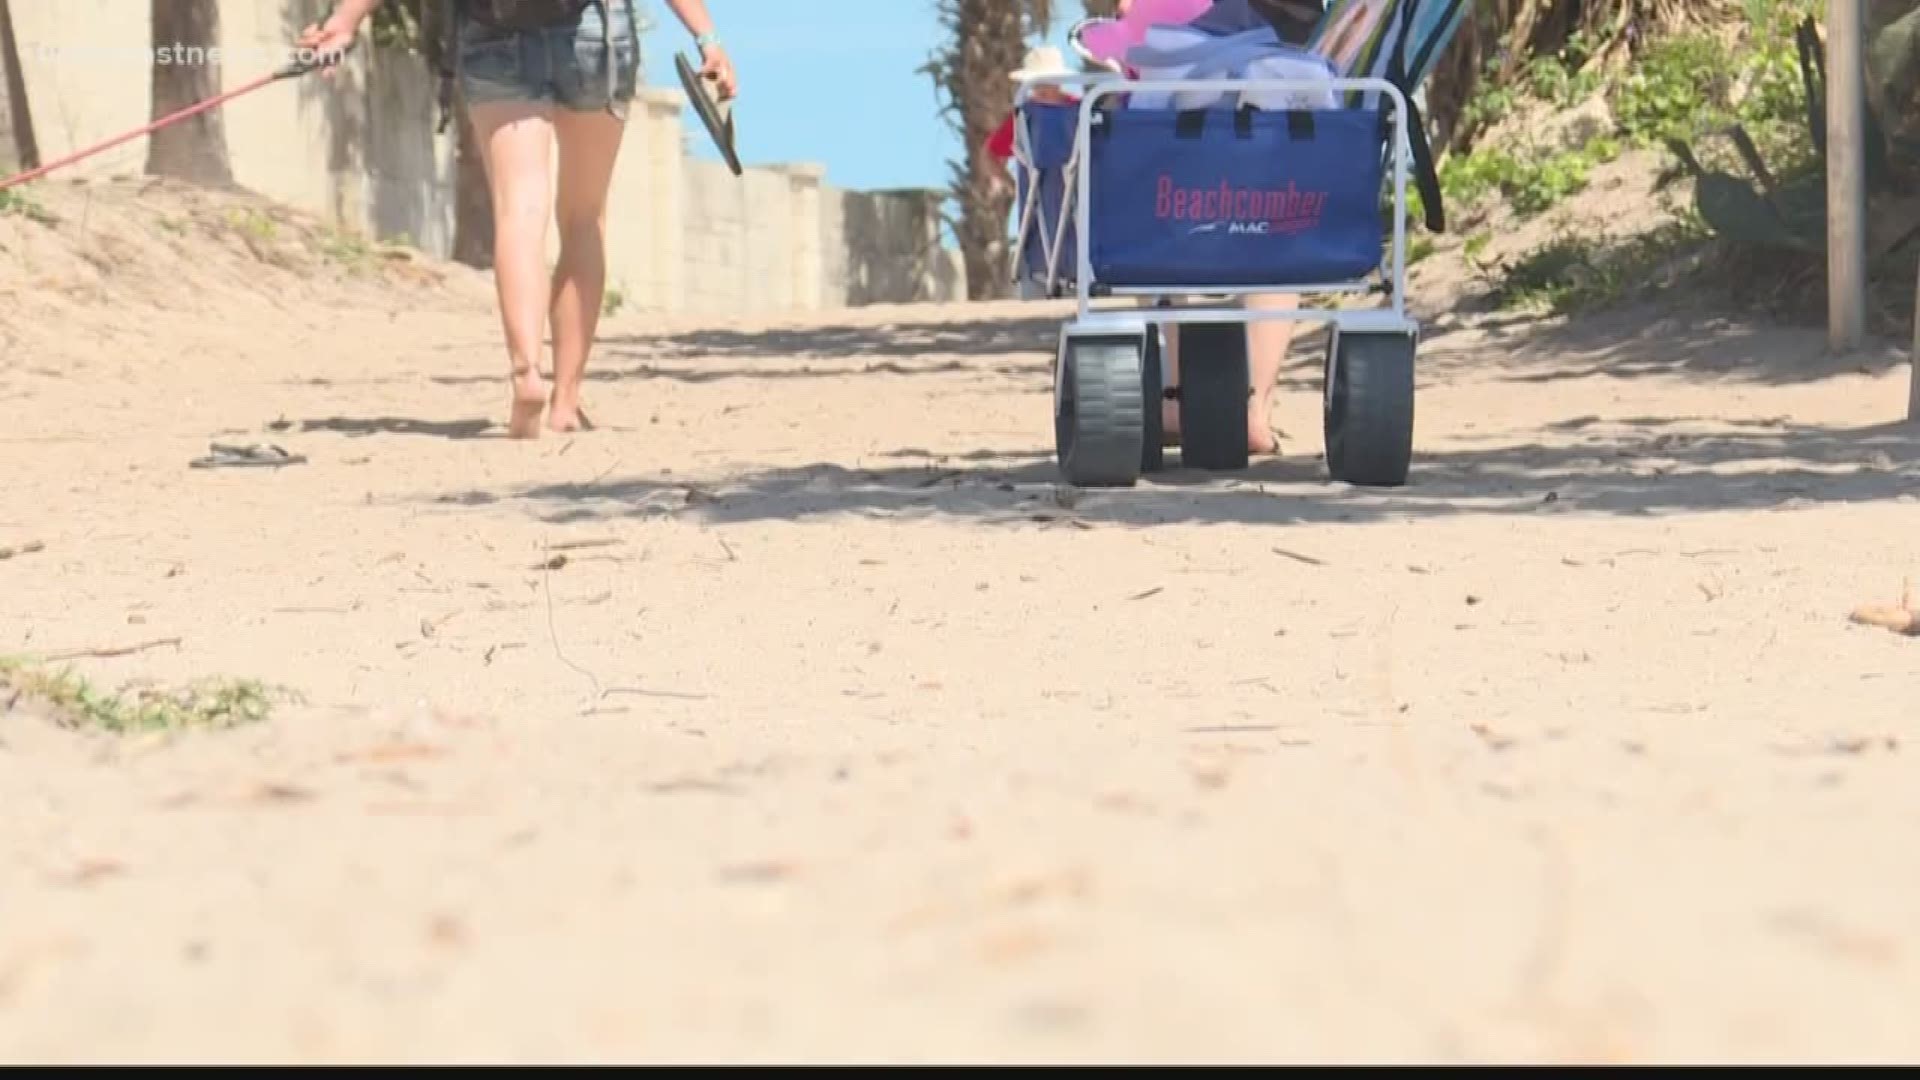 Gov. Rick Scott signed a new law, which affects what is public and private property when it comes to the beaches.